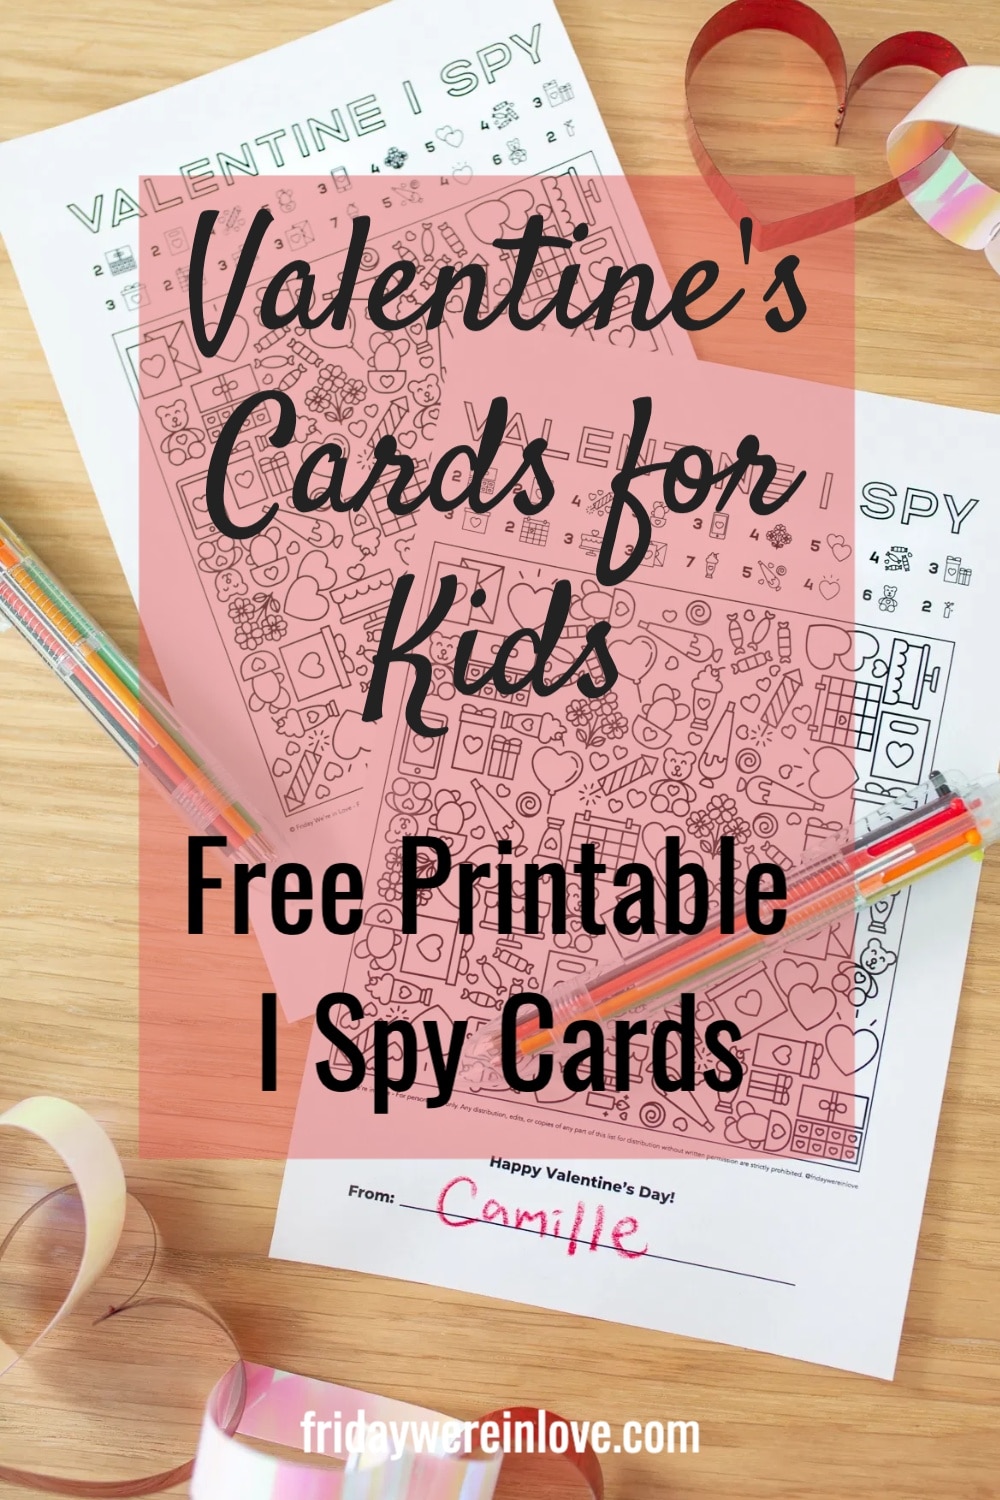 Valentines for Classmates: Printable Valentine Card - Friday We're In Love